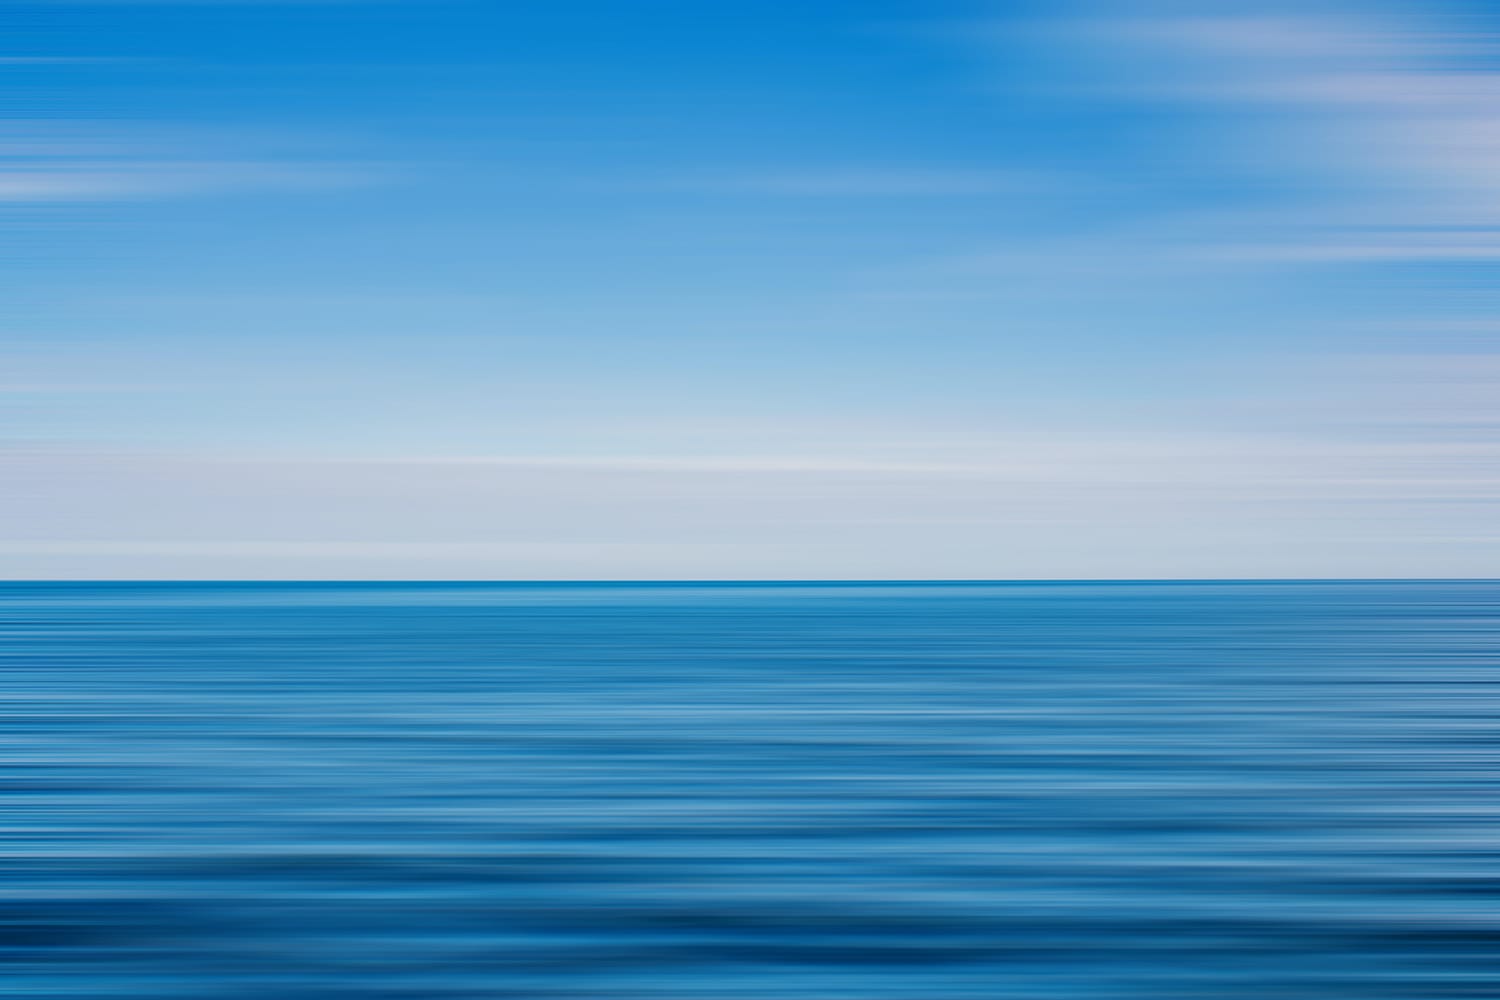 How to Purposefully Choose the Horizon Placement in Composition